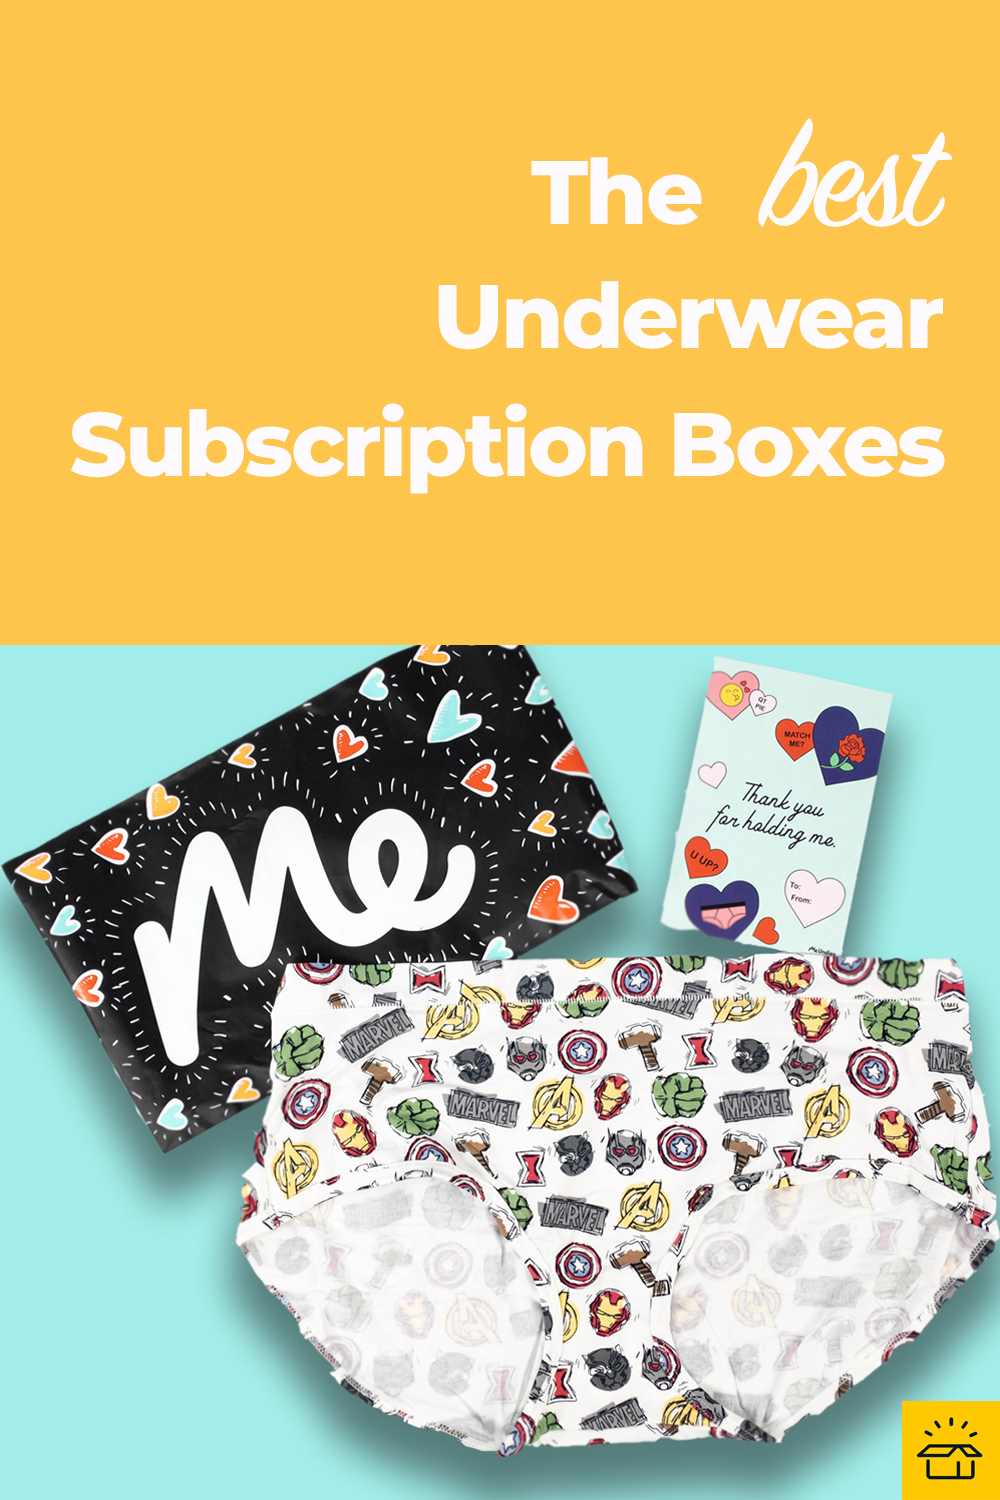 2023's 17 Best Underwear Subscriptions For Men and Your Top Drawer! - Hello Subscription